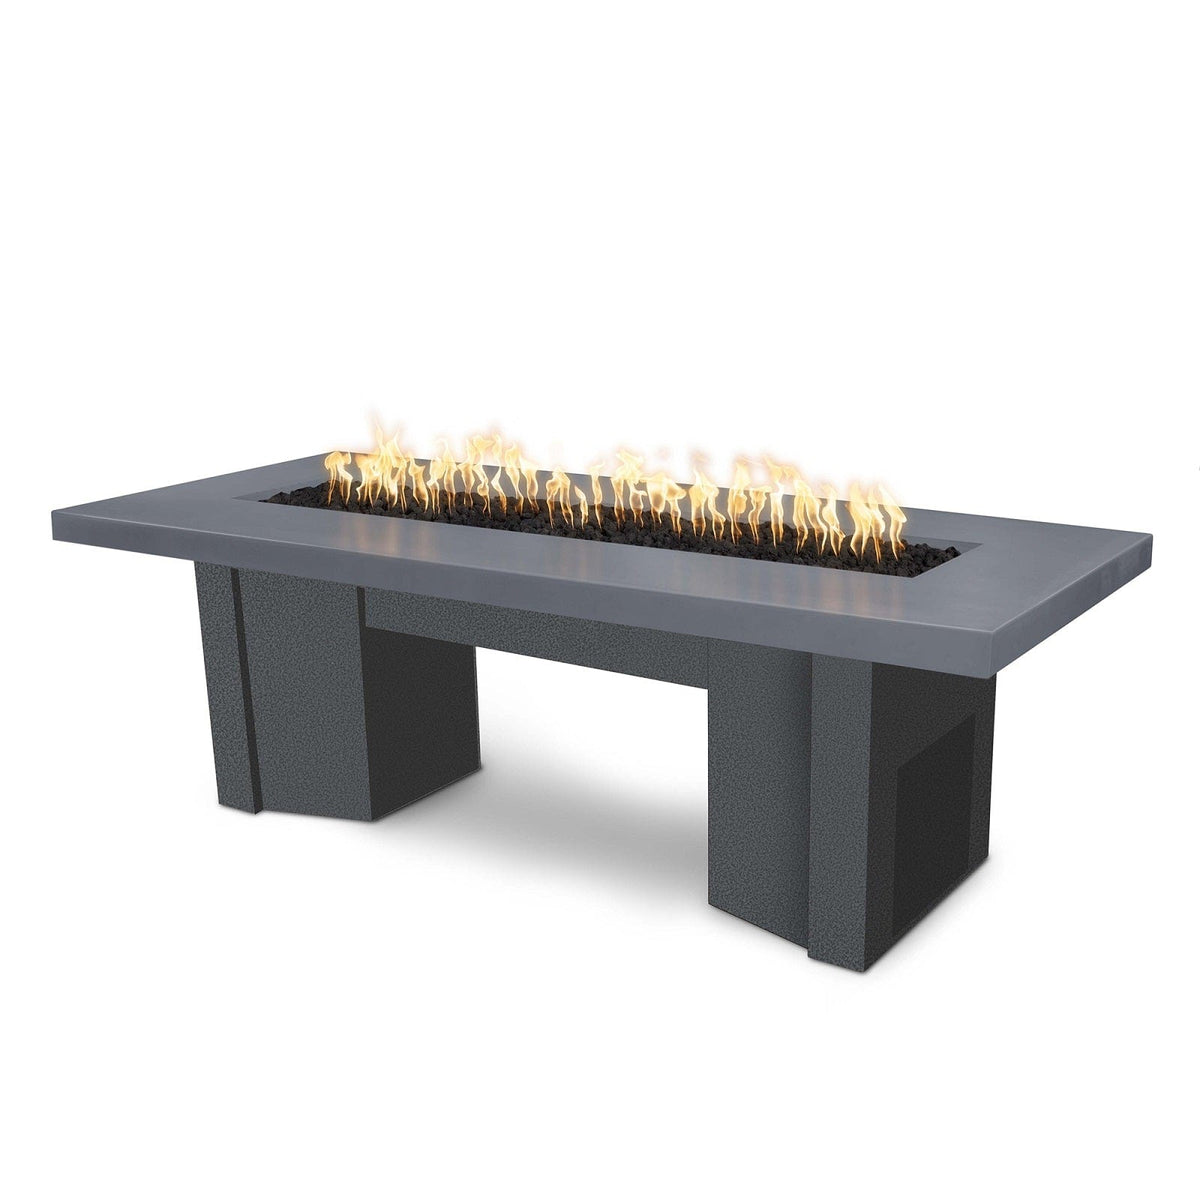 The Outdoor Plus Fire Features Gray (-GRY) / Silver Vein Powder Coated Steel (-SLV) The Outdoor Plus 60&quot; Alameda Fire Table Smooth Concrete in Natural Gas - Flame Sense System with Push Button Spark Igniter / OPT-ALMGFRC60FSEN-NG